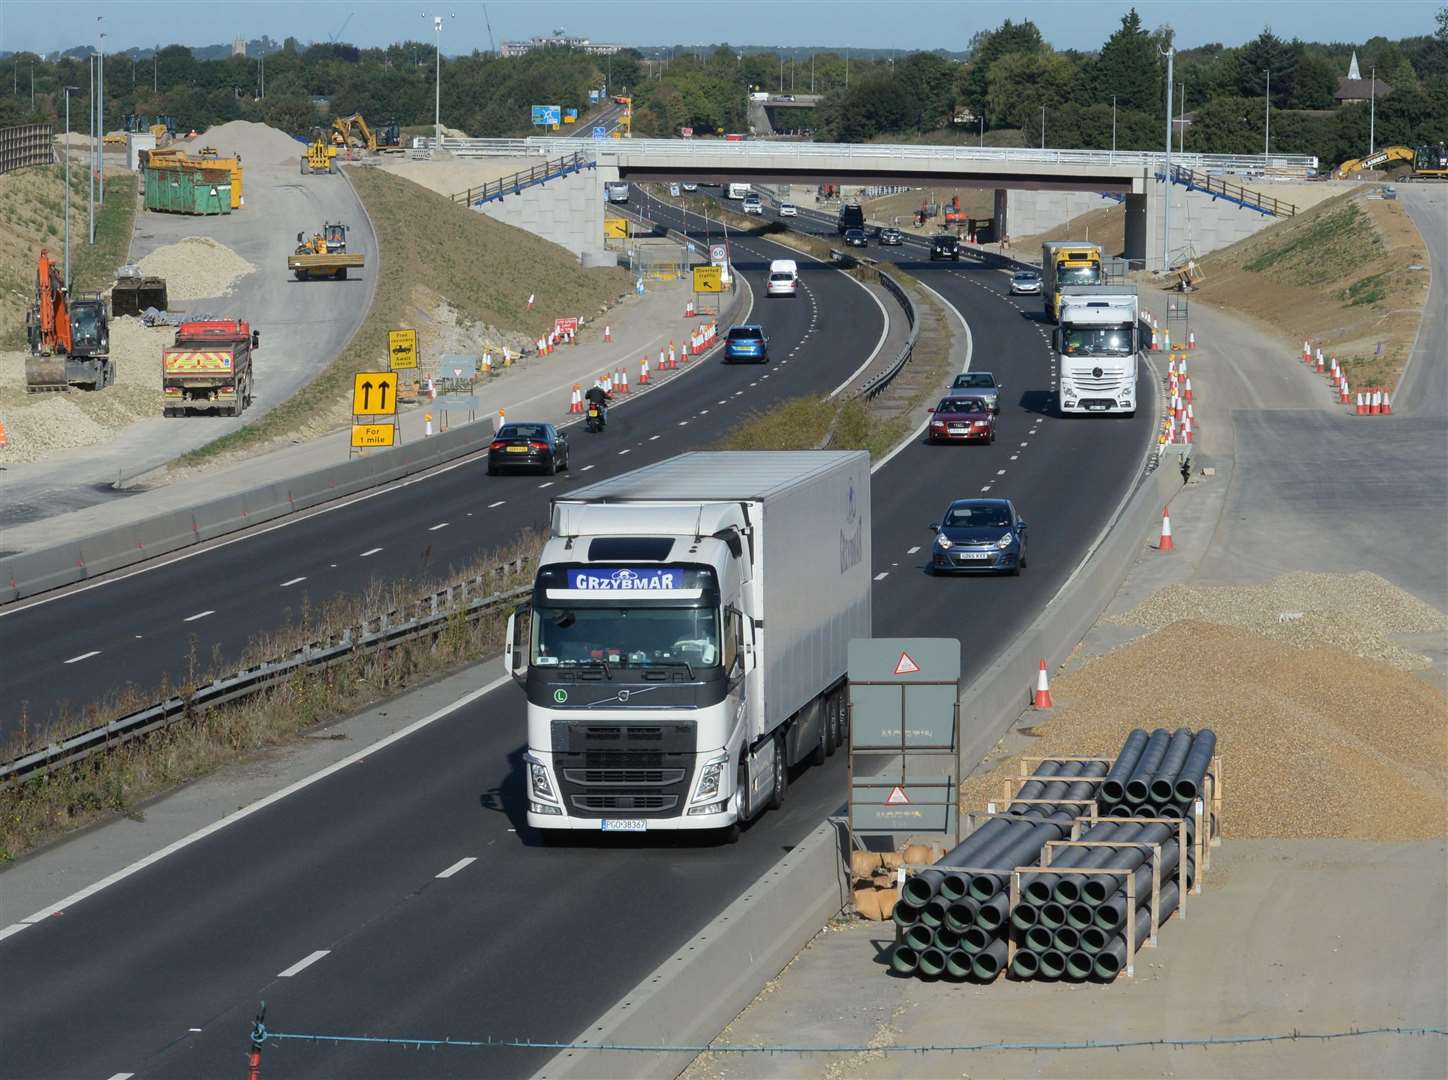 The junction will open to lorries later this month